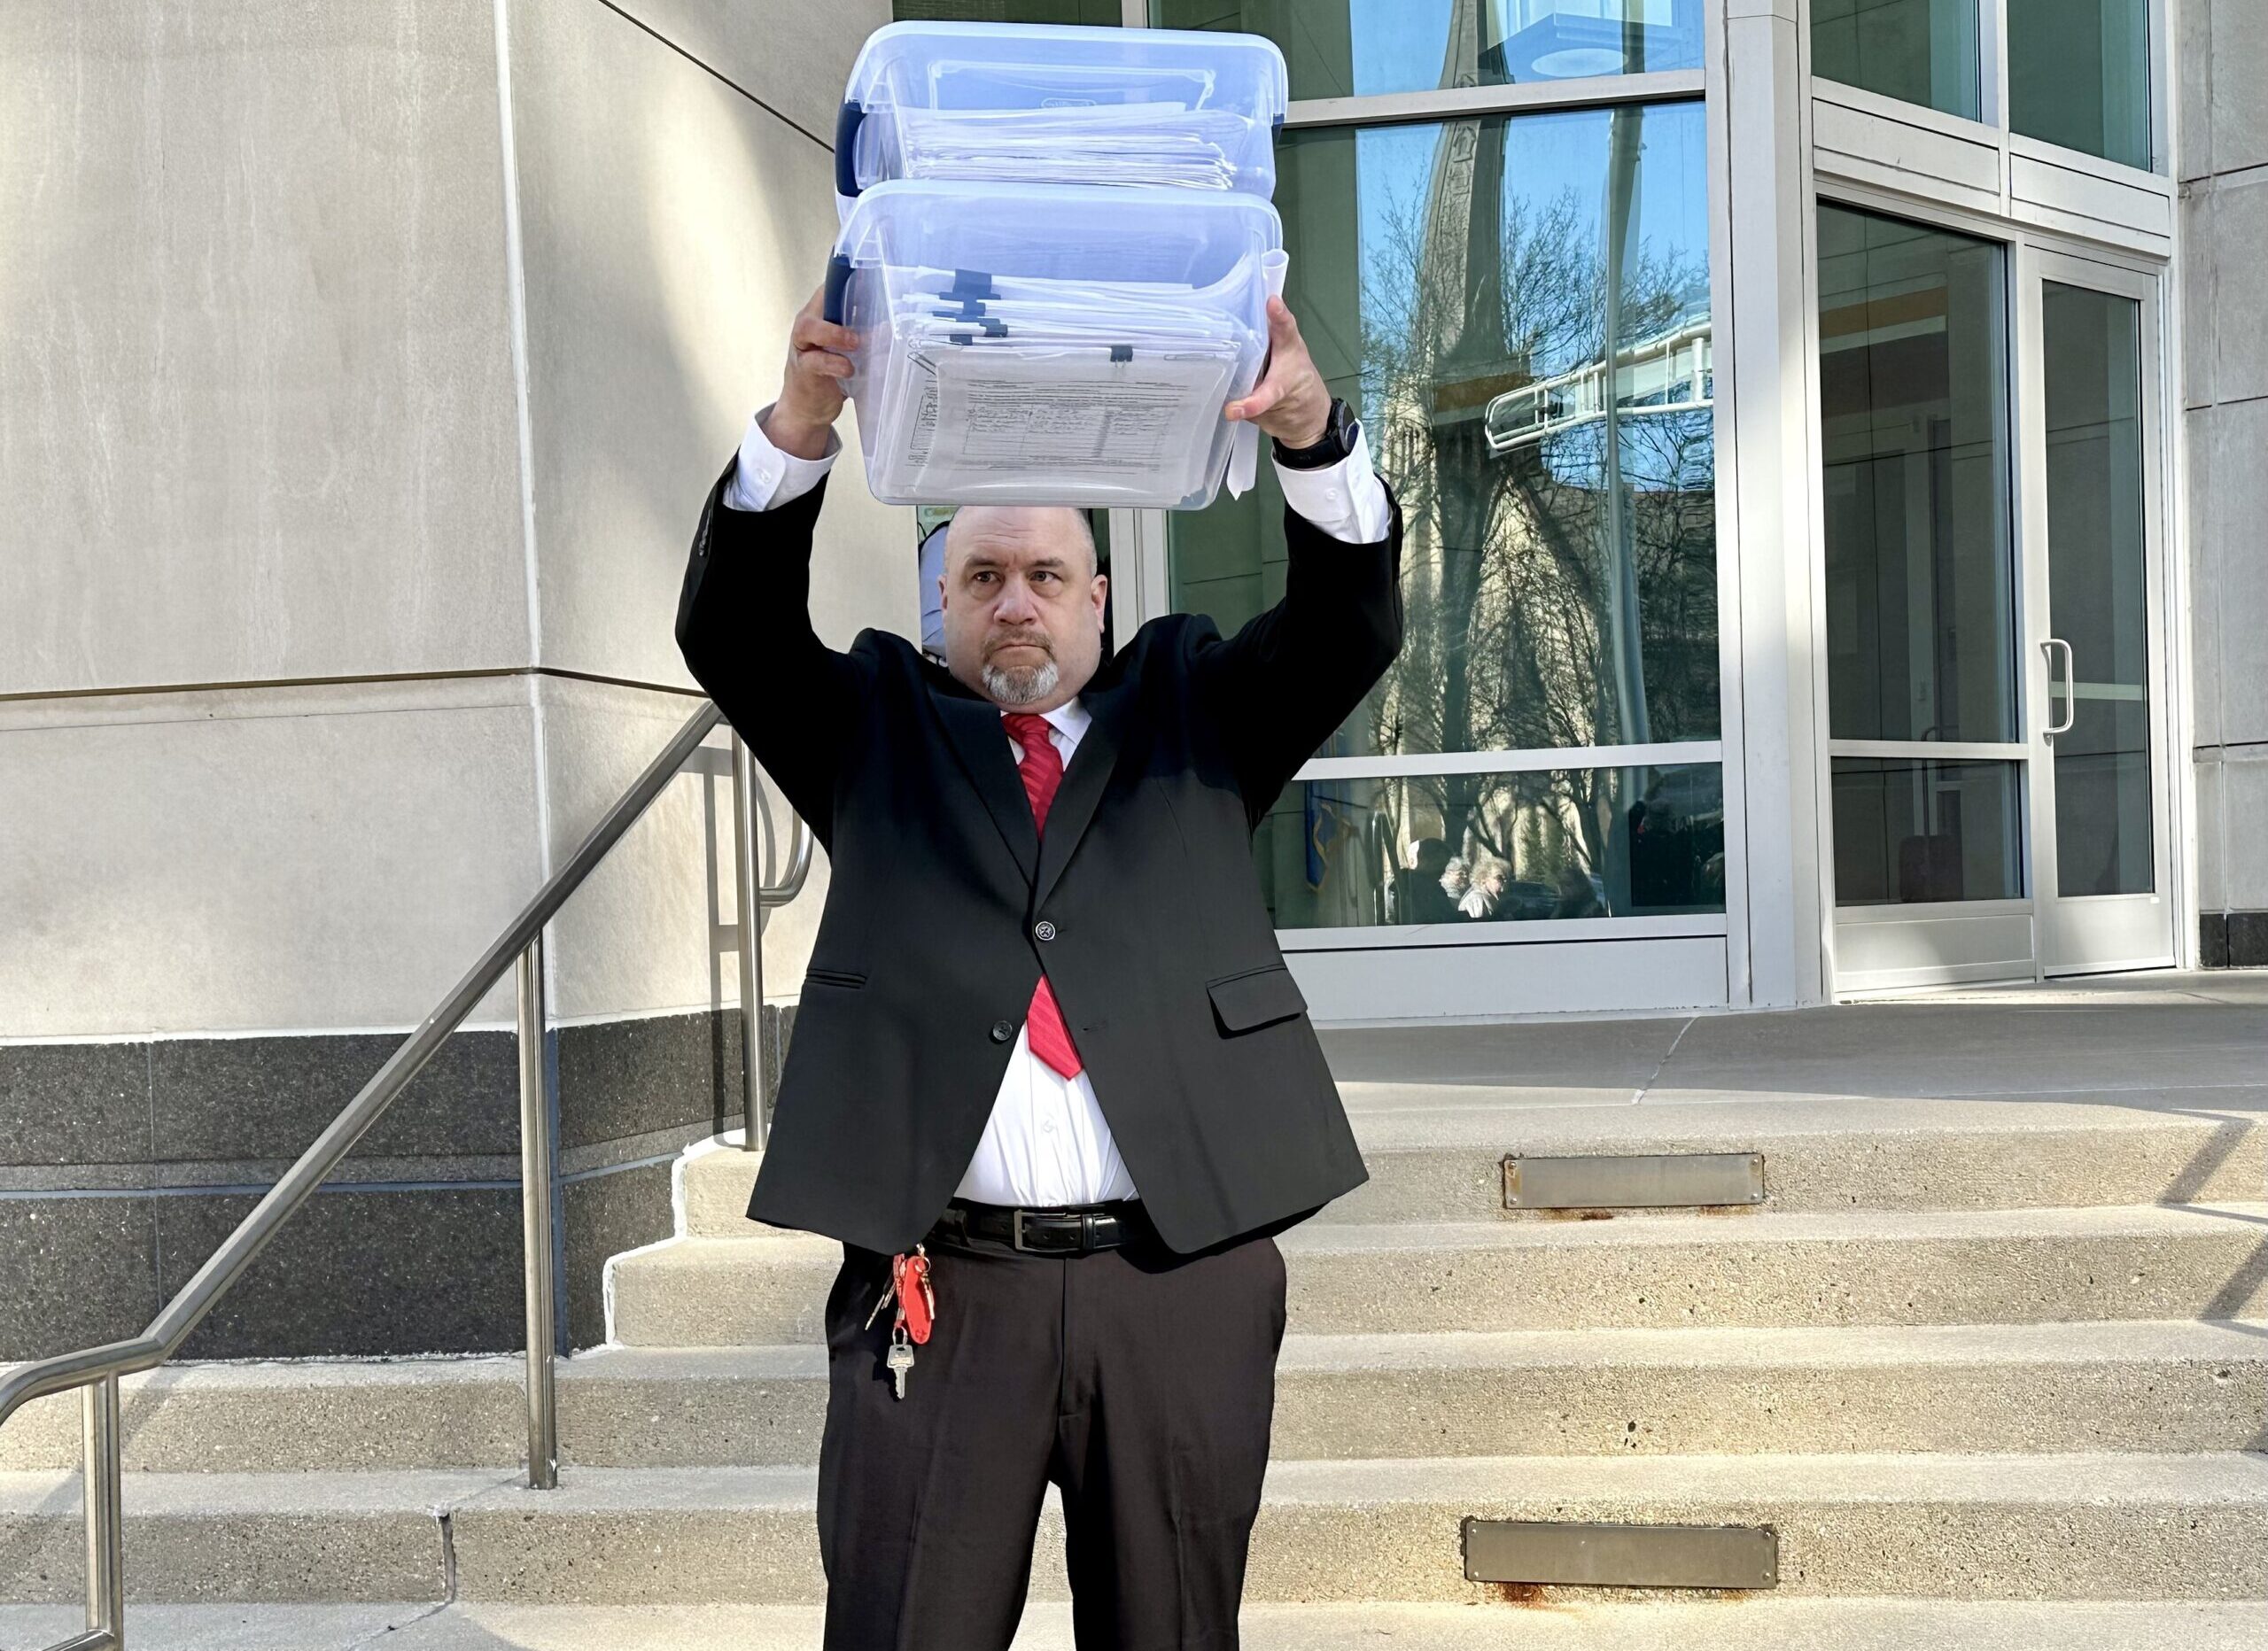 ‘Recall Vos’ organizers deliver signatures in effort to remove Assembly speaker